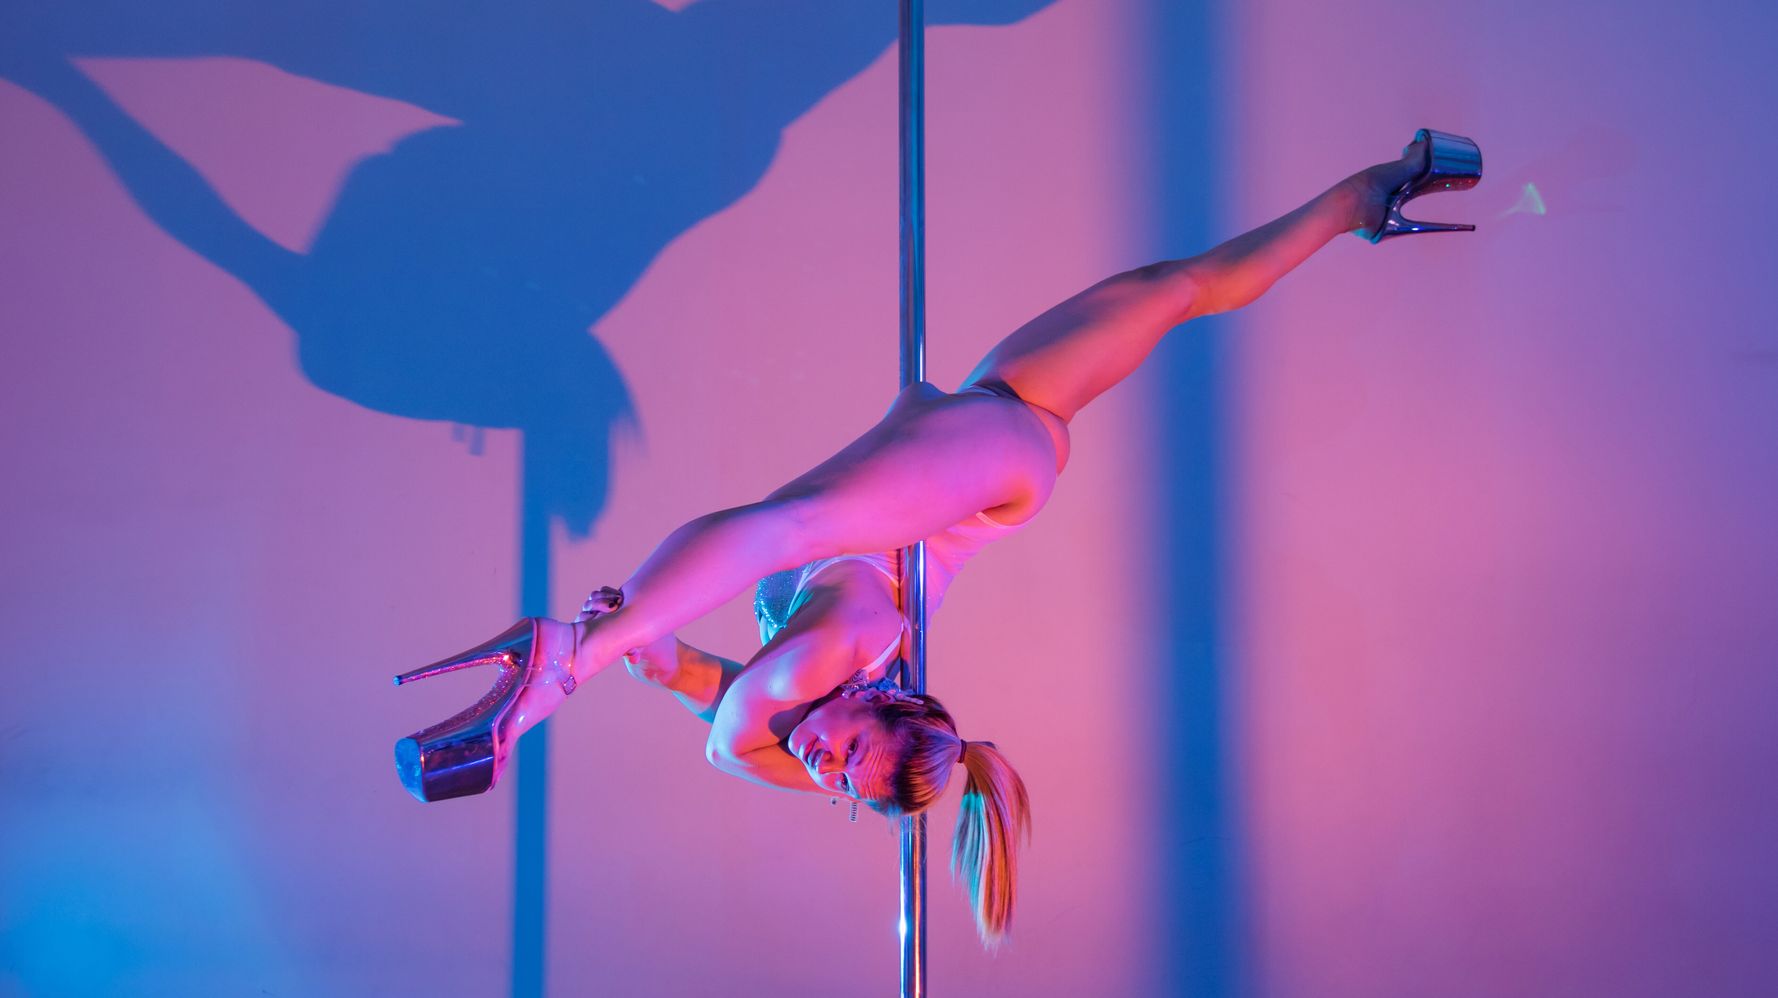 Pole Dancing - When I Was Outed For My Porn Past, Pole Dancing Helped Me Heal | HuffPost